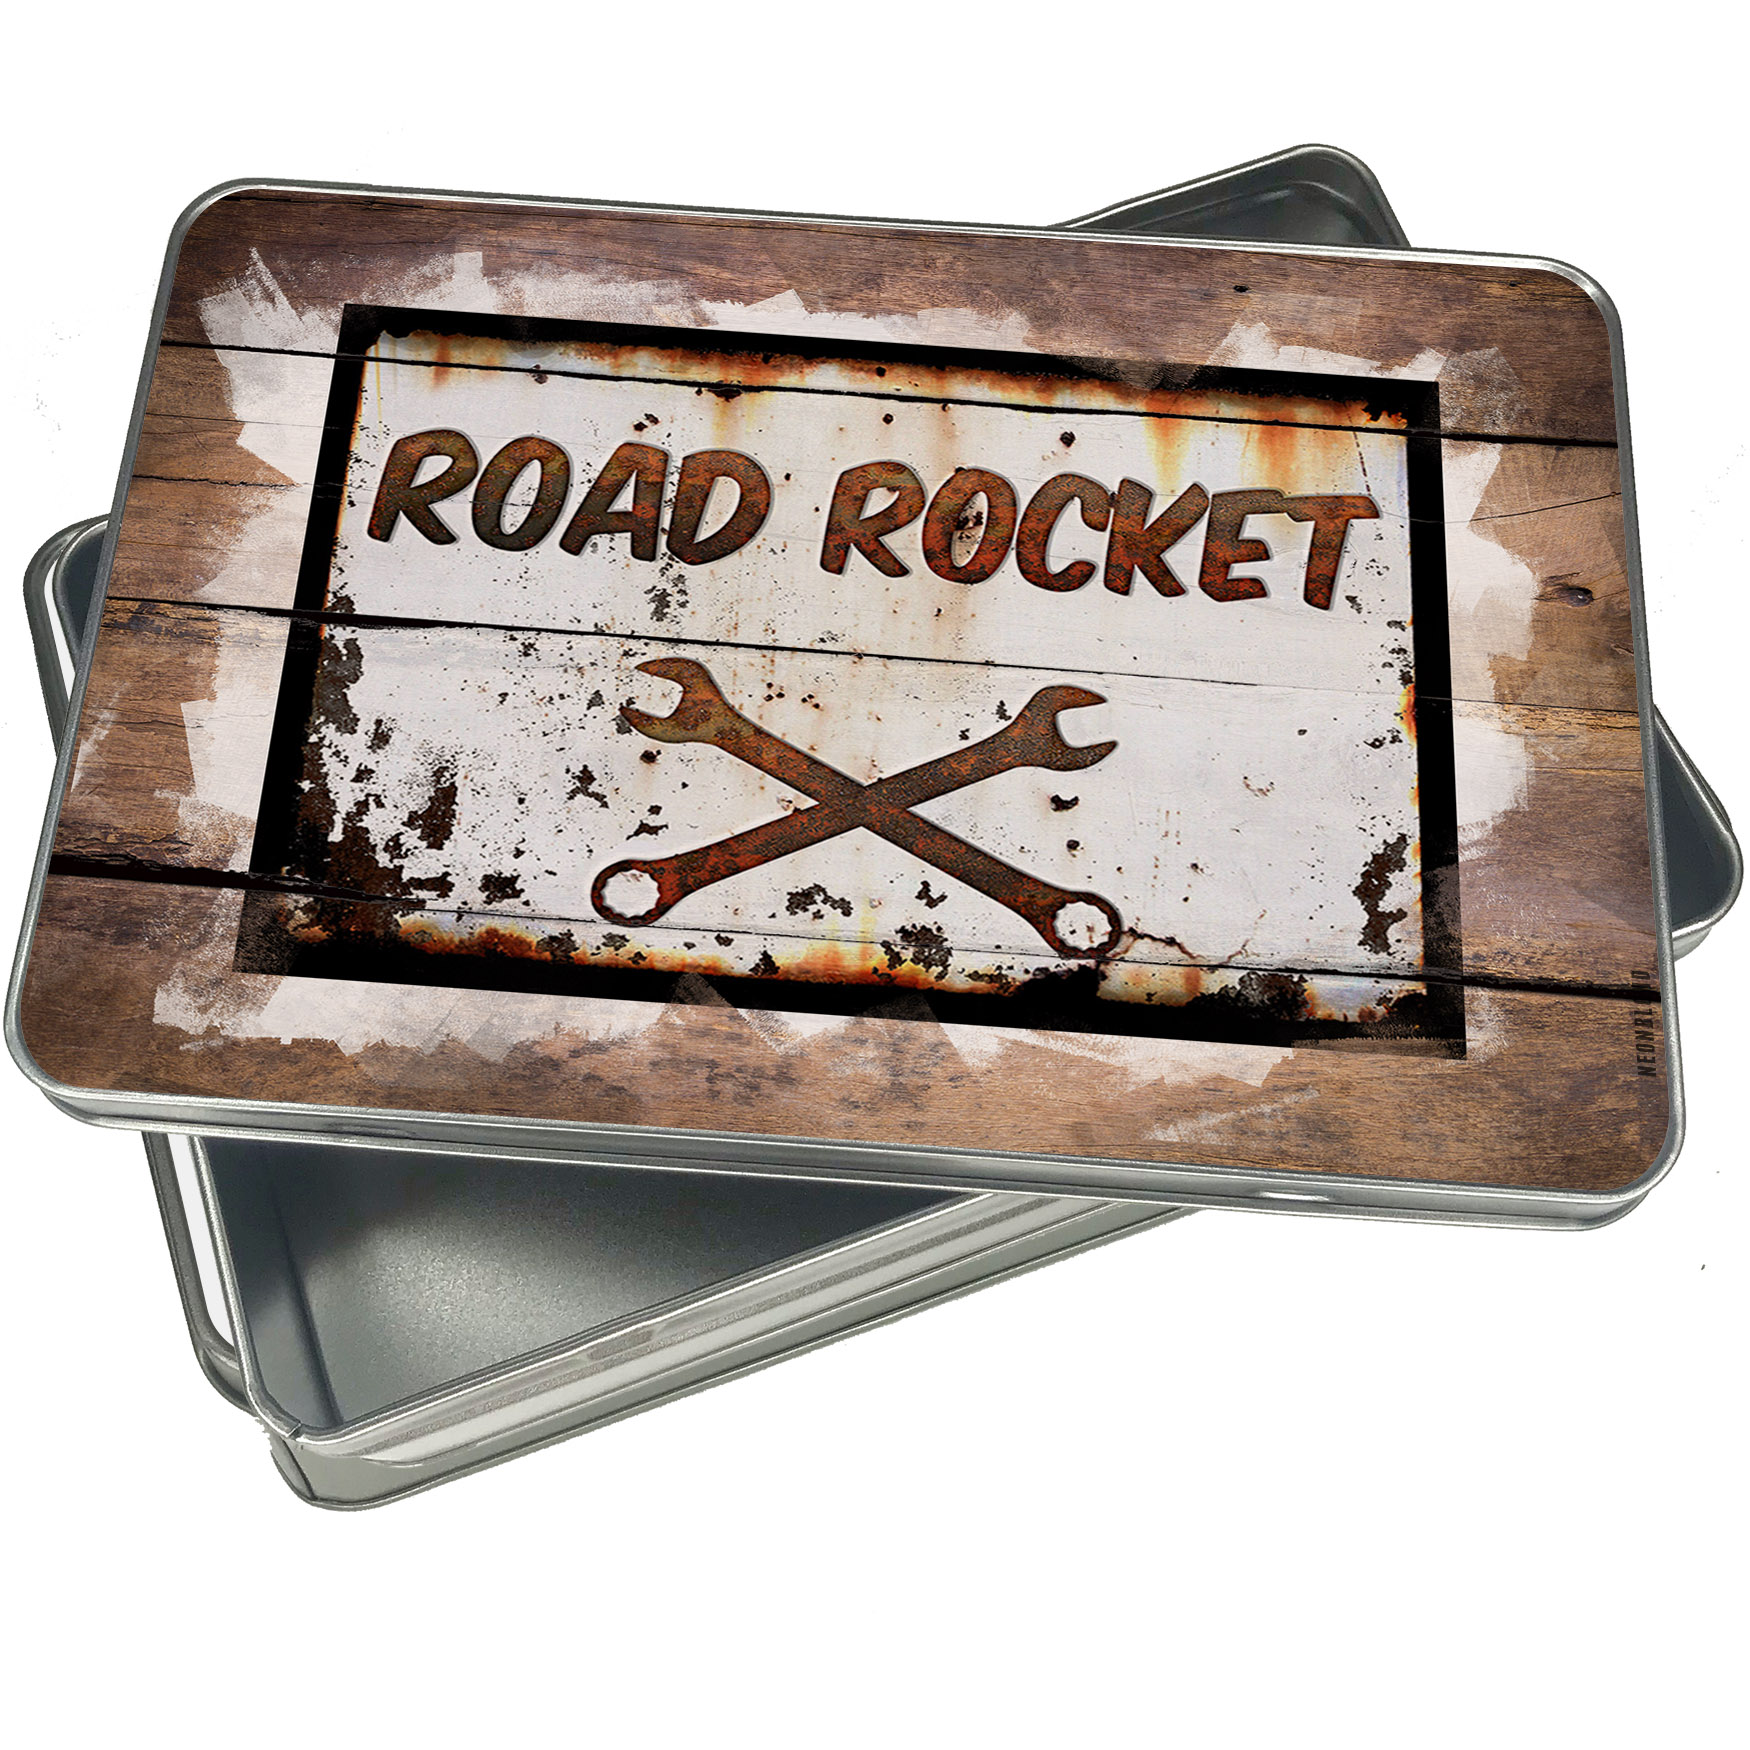 Christmas Cookie Tin Rusty old look car Road Rocket for Gift Giving Empty Candy Snack Pastry Treat Swap Box Cerebrate a Holiday - image 1 of 1